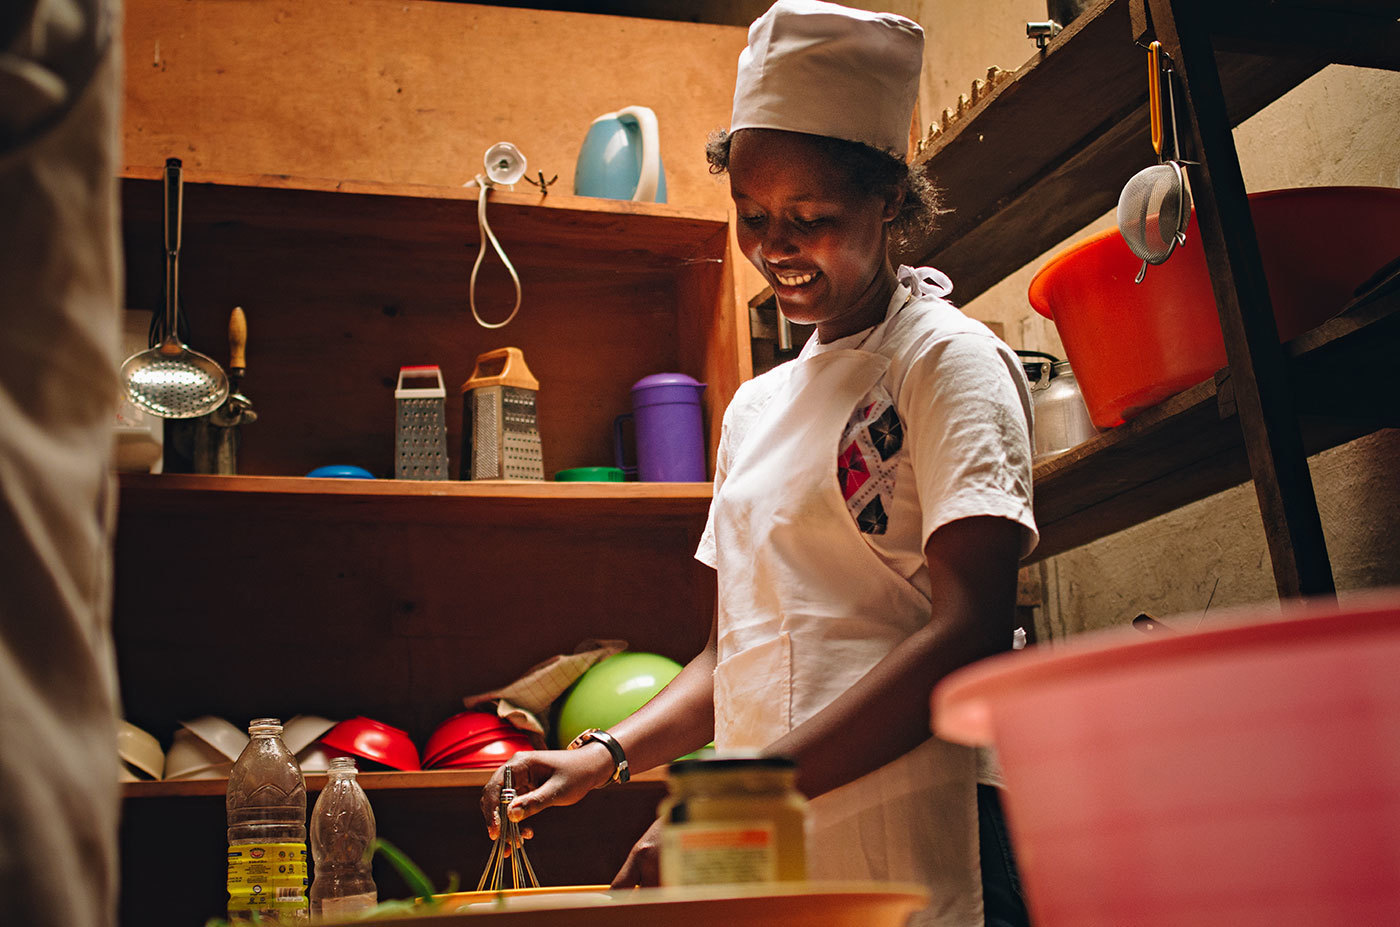 A Rwandan woman in a chef hat whisks something in a bowl